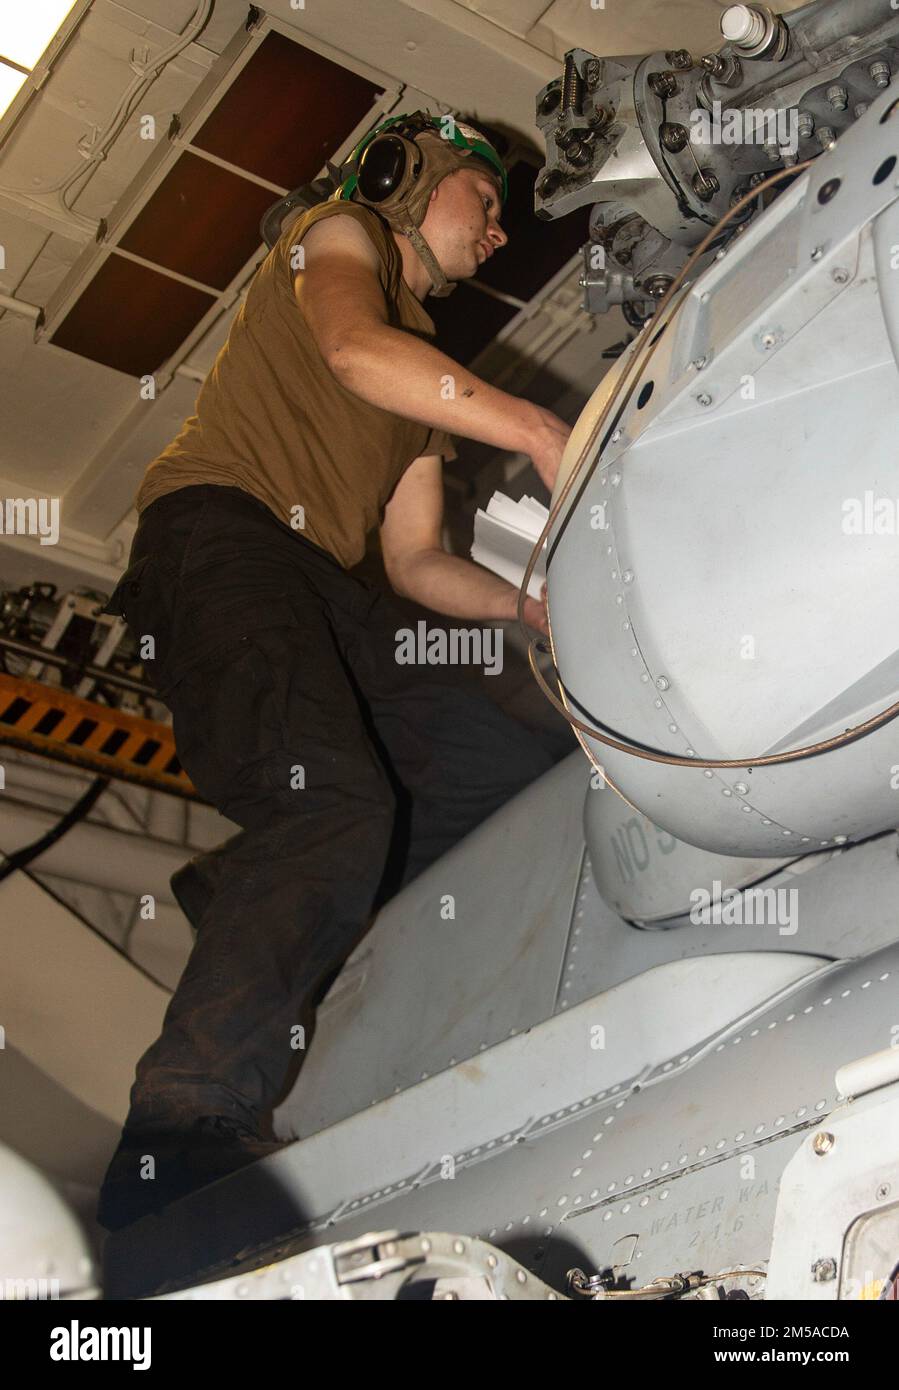 SOUTH CHINA SEA (Feb. 15, 2022) Aviation Machinist Mate 3rd Class Sean Gibbens, from Texarkana, Texas, conducts maintenance on an MH-60R helicopter aboard Arleigh Burke-class guided-missile destroyer USS Ralph Johnson (DDG 114). Ralph Johnson is assigned to Task Force 71/Destroyer Squadron (DESRON) 15, the Navy’s largest forward-deployed DESRON and the U.S. 7th fleet’s principal surface force. Stock Photo